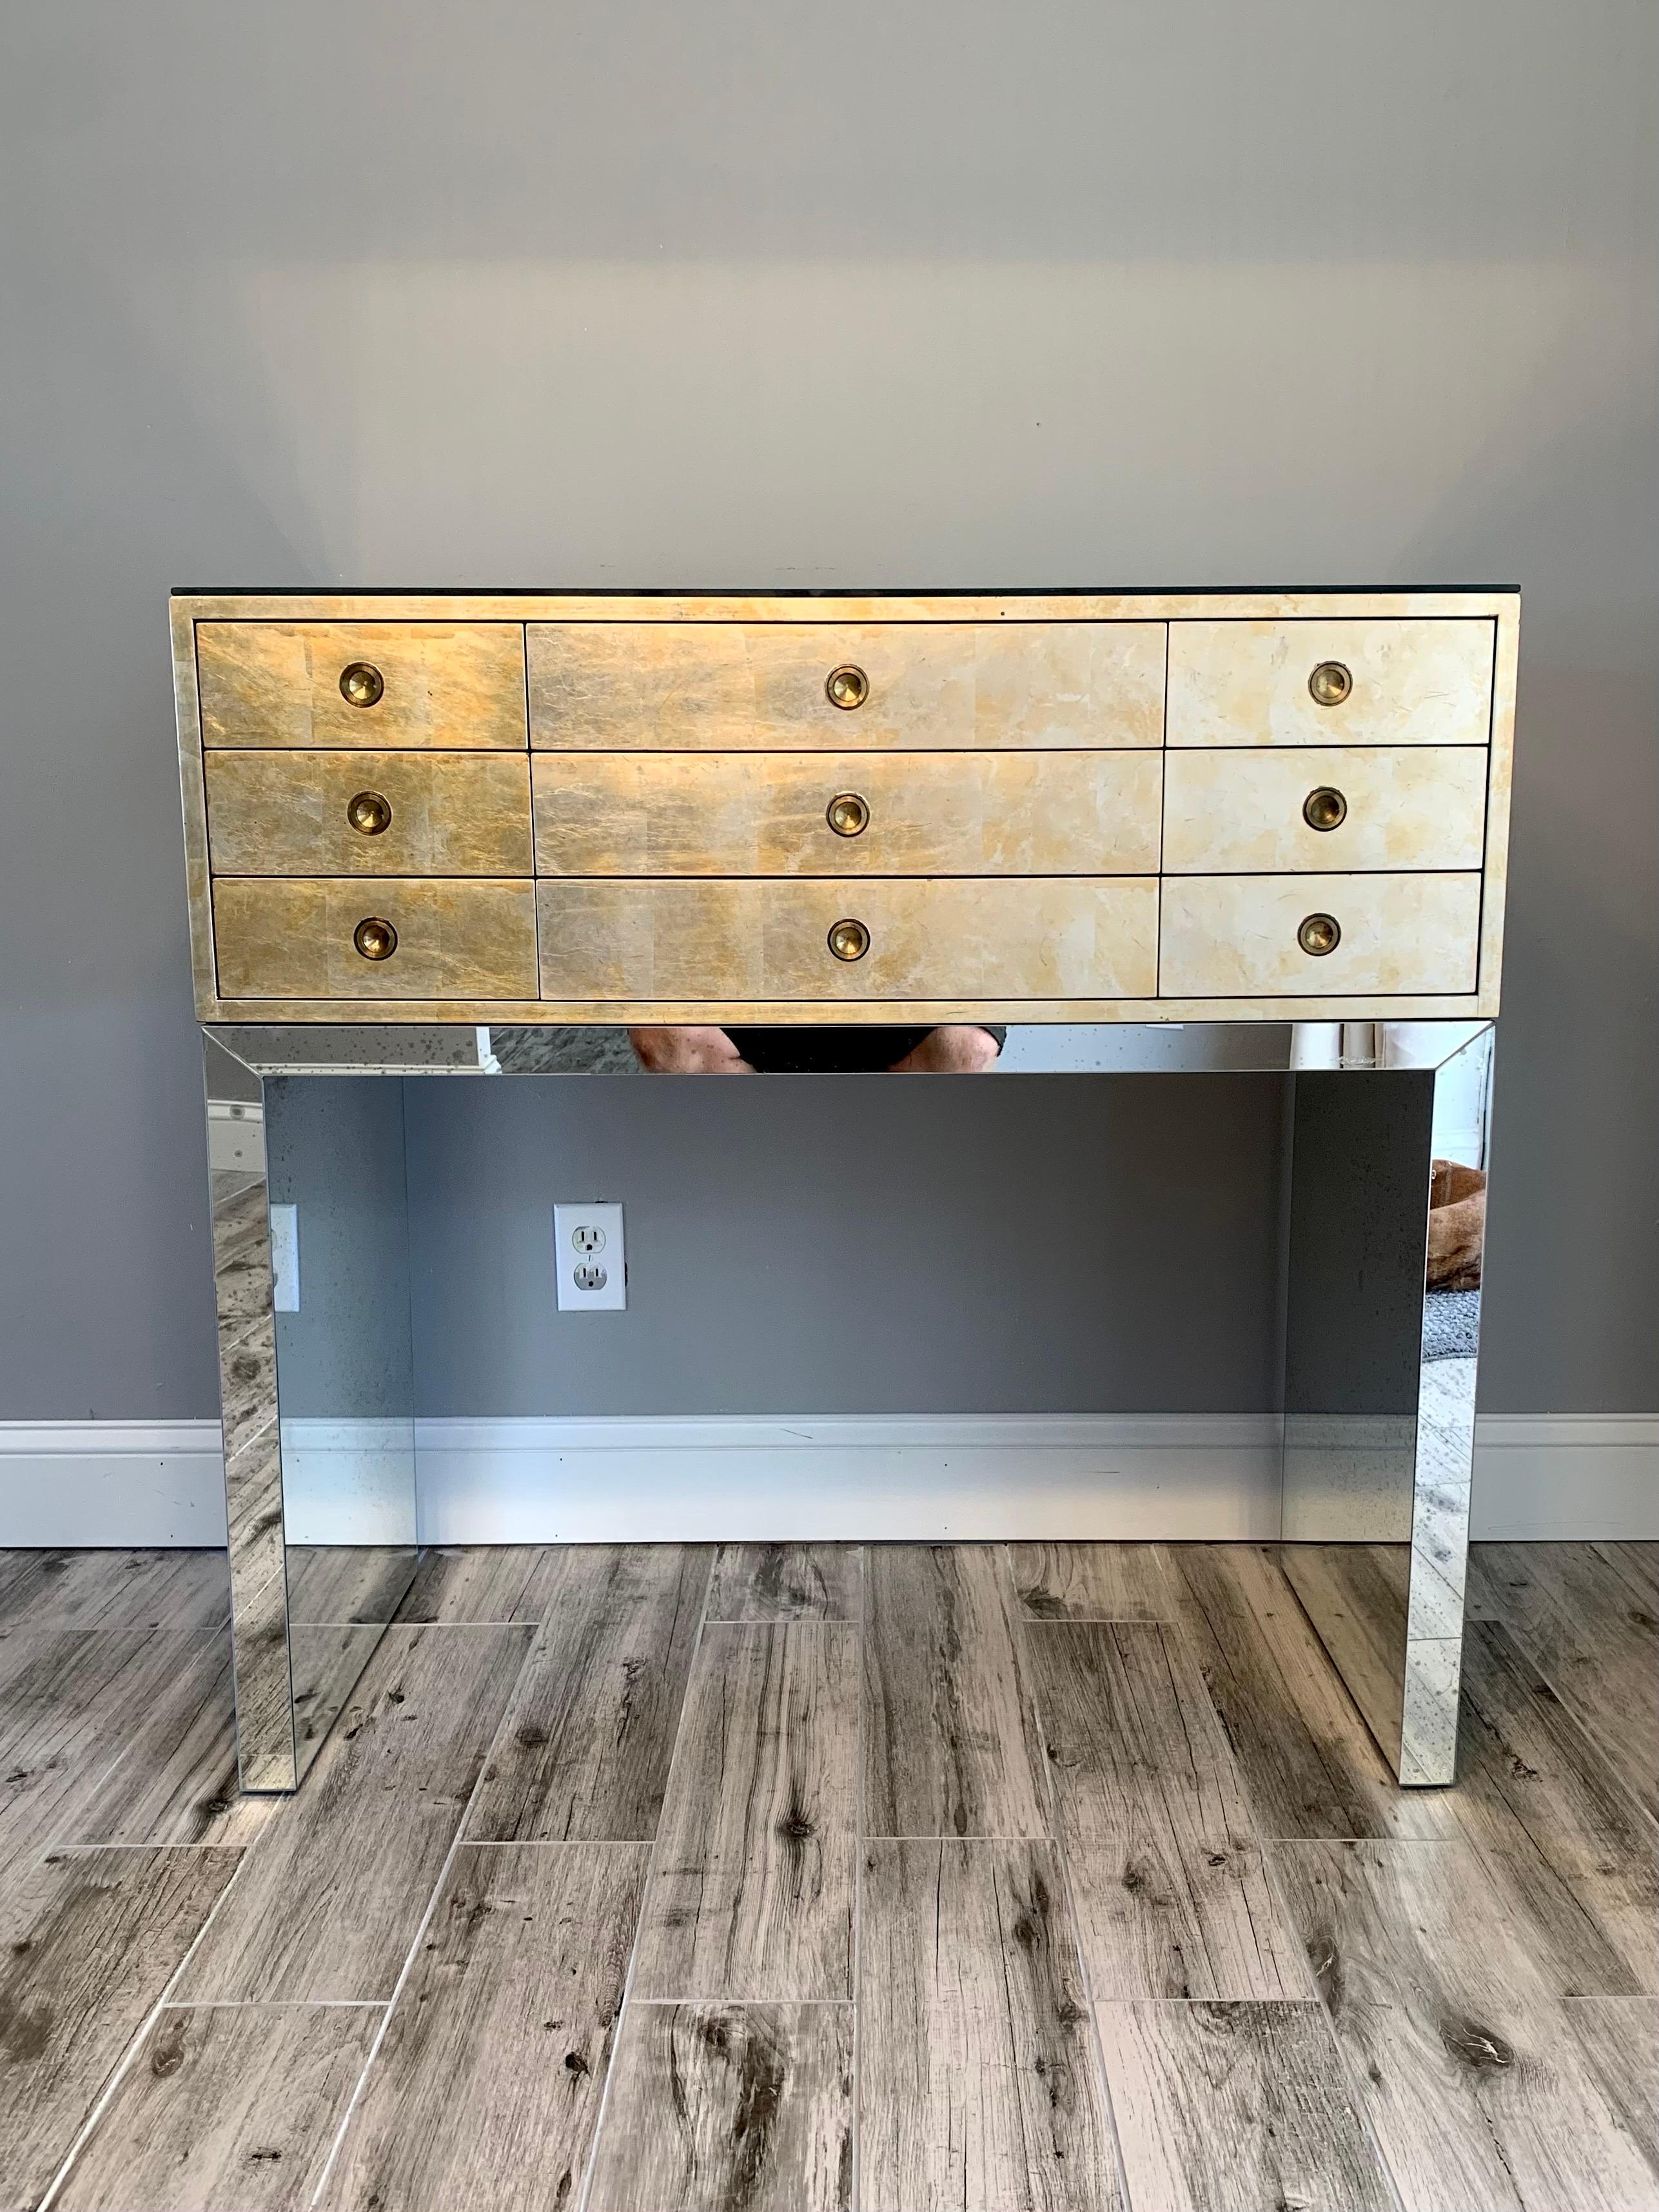 Elegant chest of drawers by Kittinger of Buffalo. Could be used as a console table, mini dresser, or jewelry chest. The cabinet is covered in metal leaf that has gold and silver elements and colors. It appears to be faded gold leaf. 9 total drawers